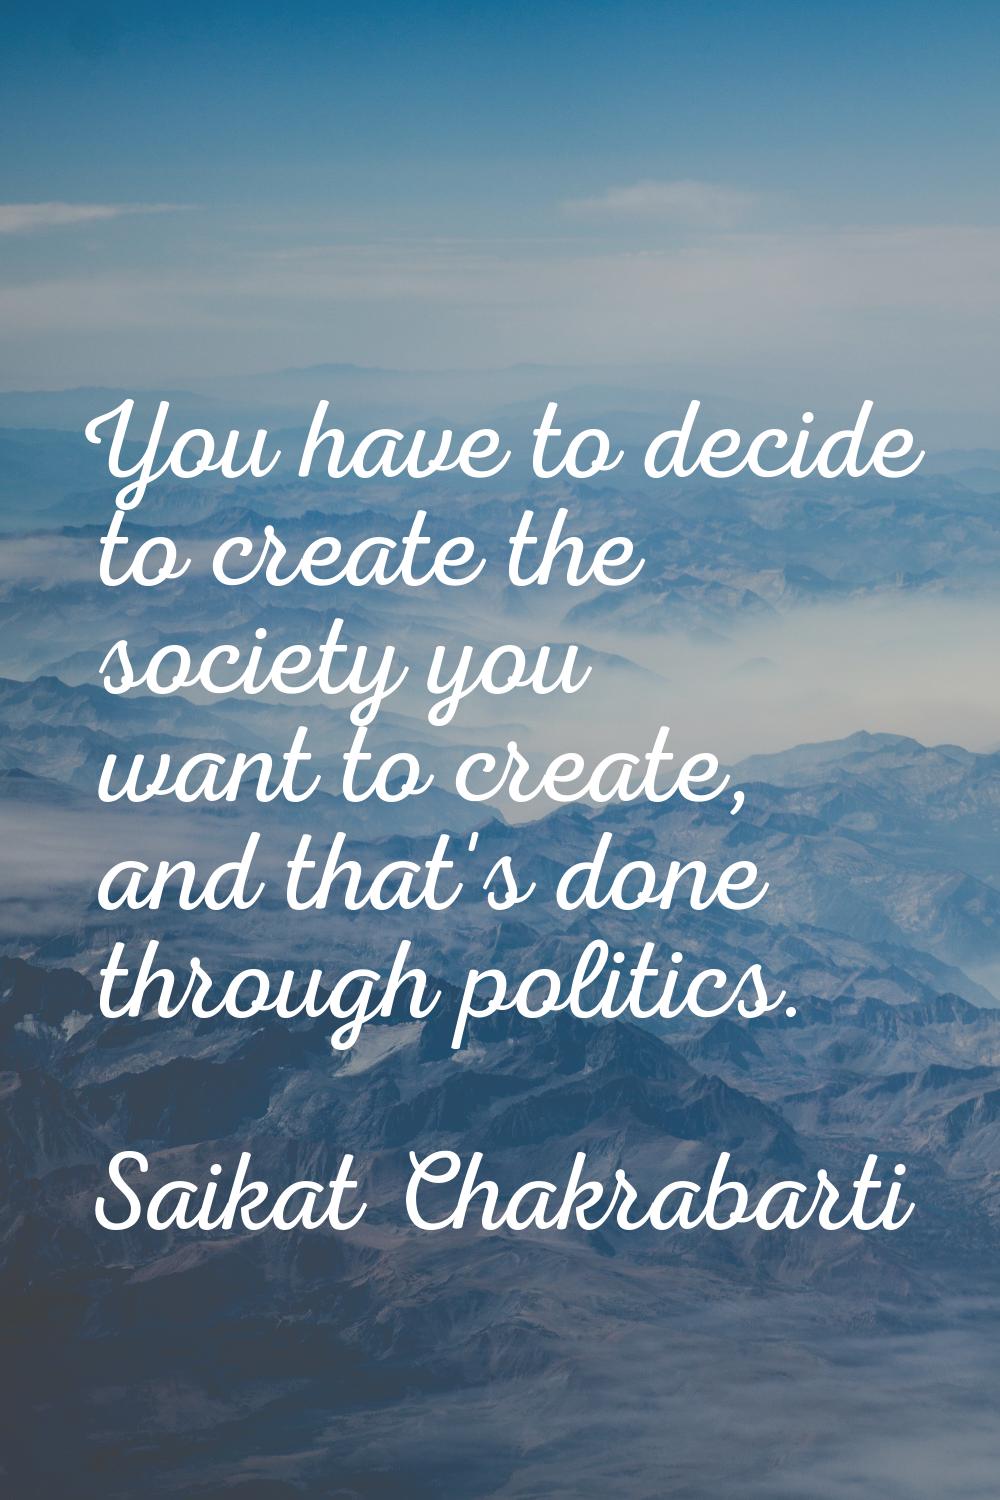 You have to decide to create the society you want to create, and that's done through politics.